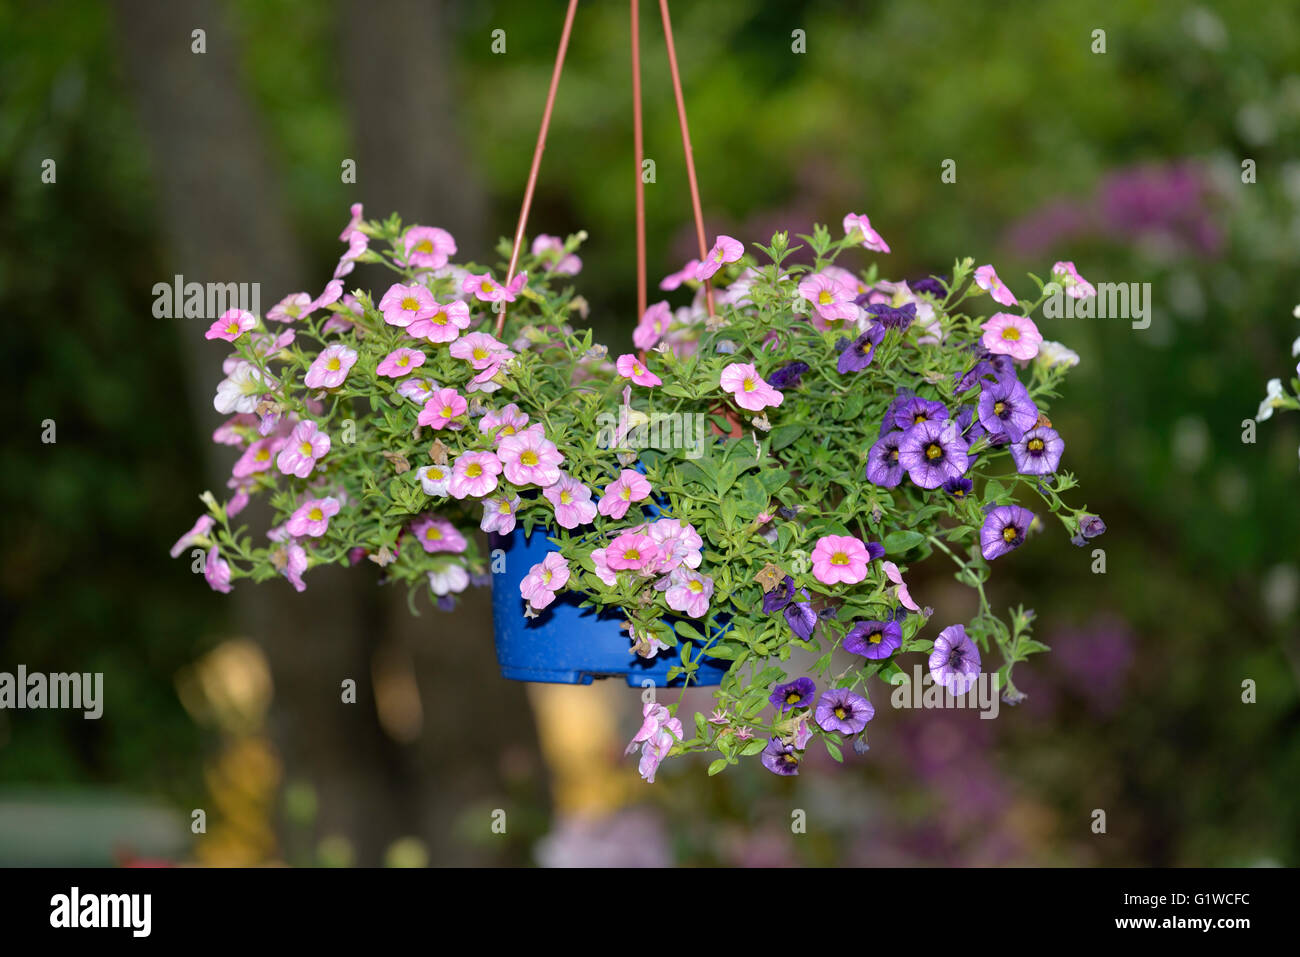 Hanging pot with flowers Stock Photo